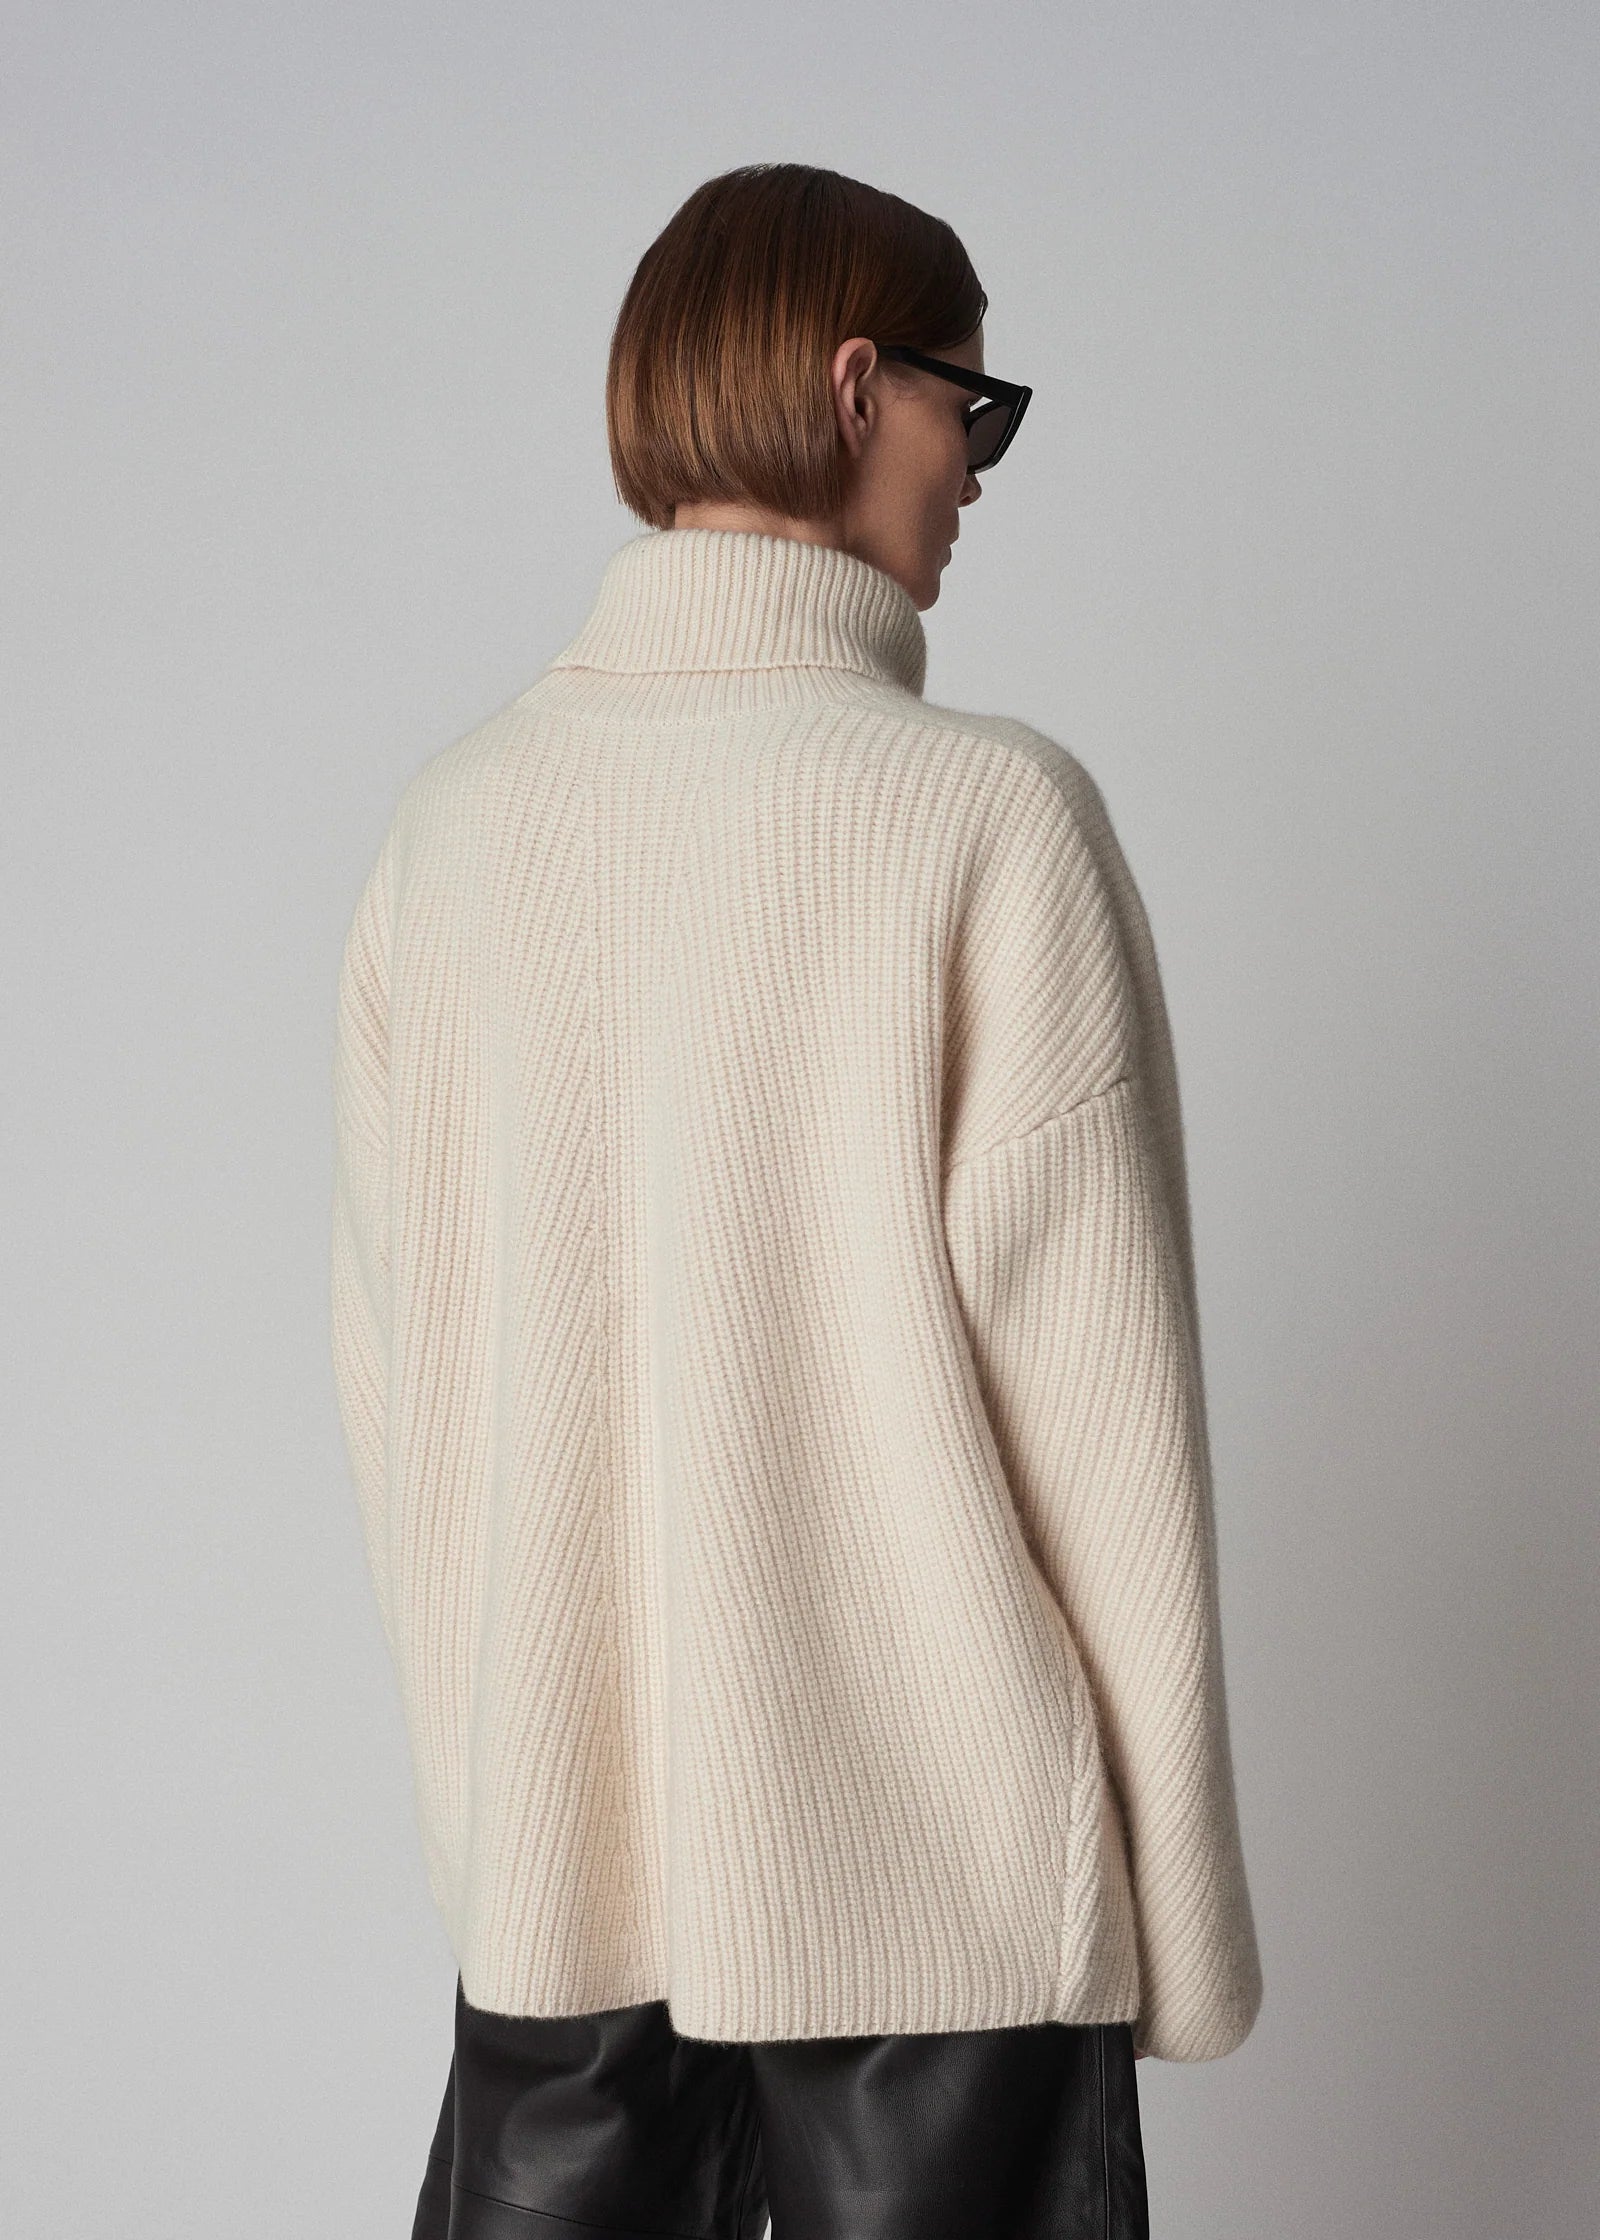 CO Turtleneck Sweater In Cashmere